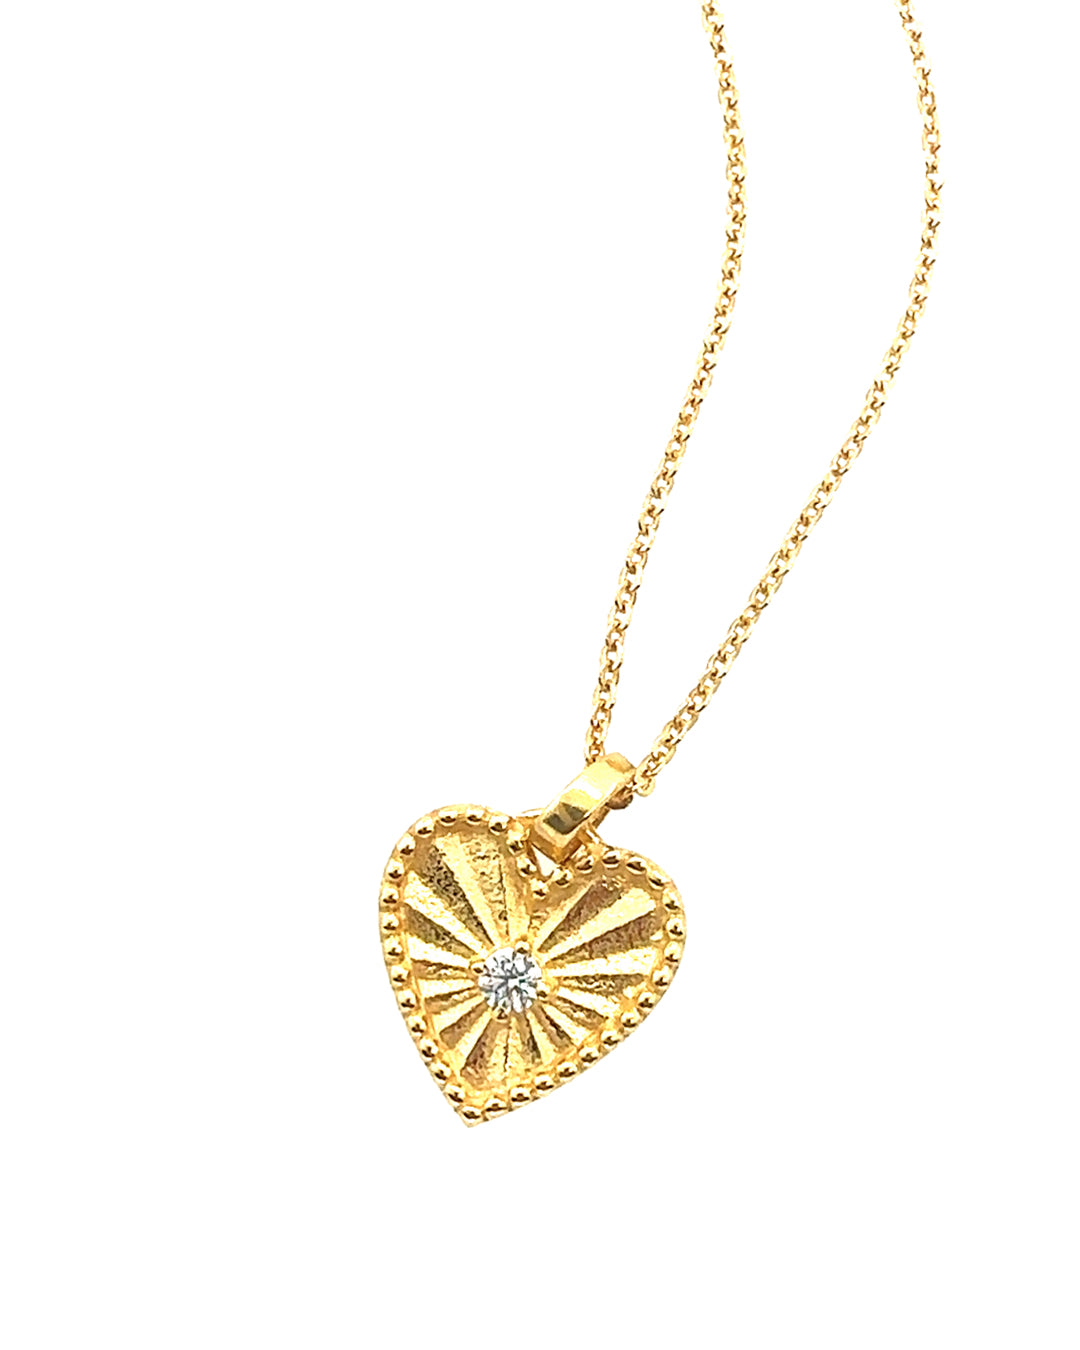 14k gold fill love heart token pendant on gold fill necklace chain